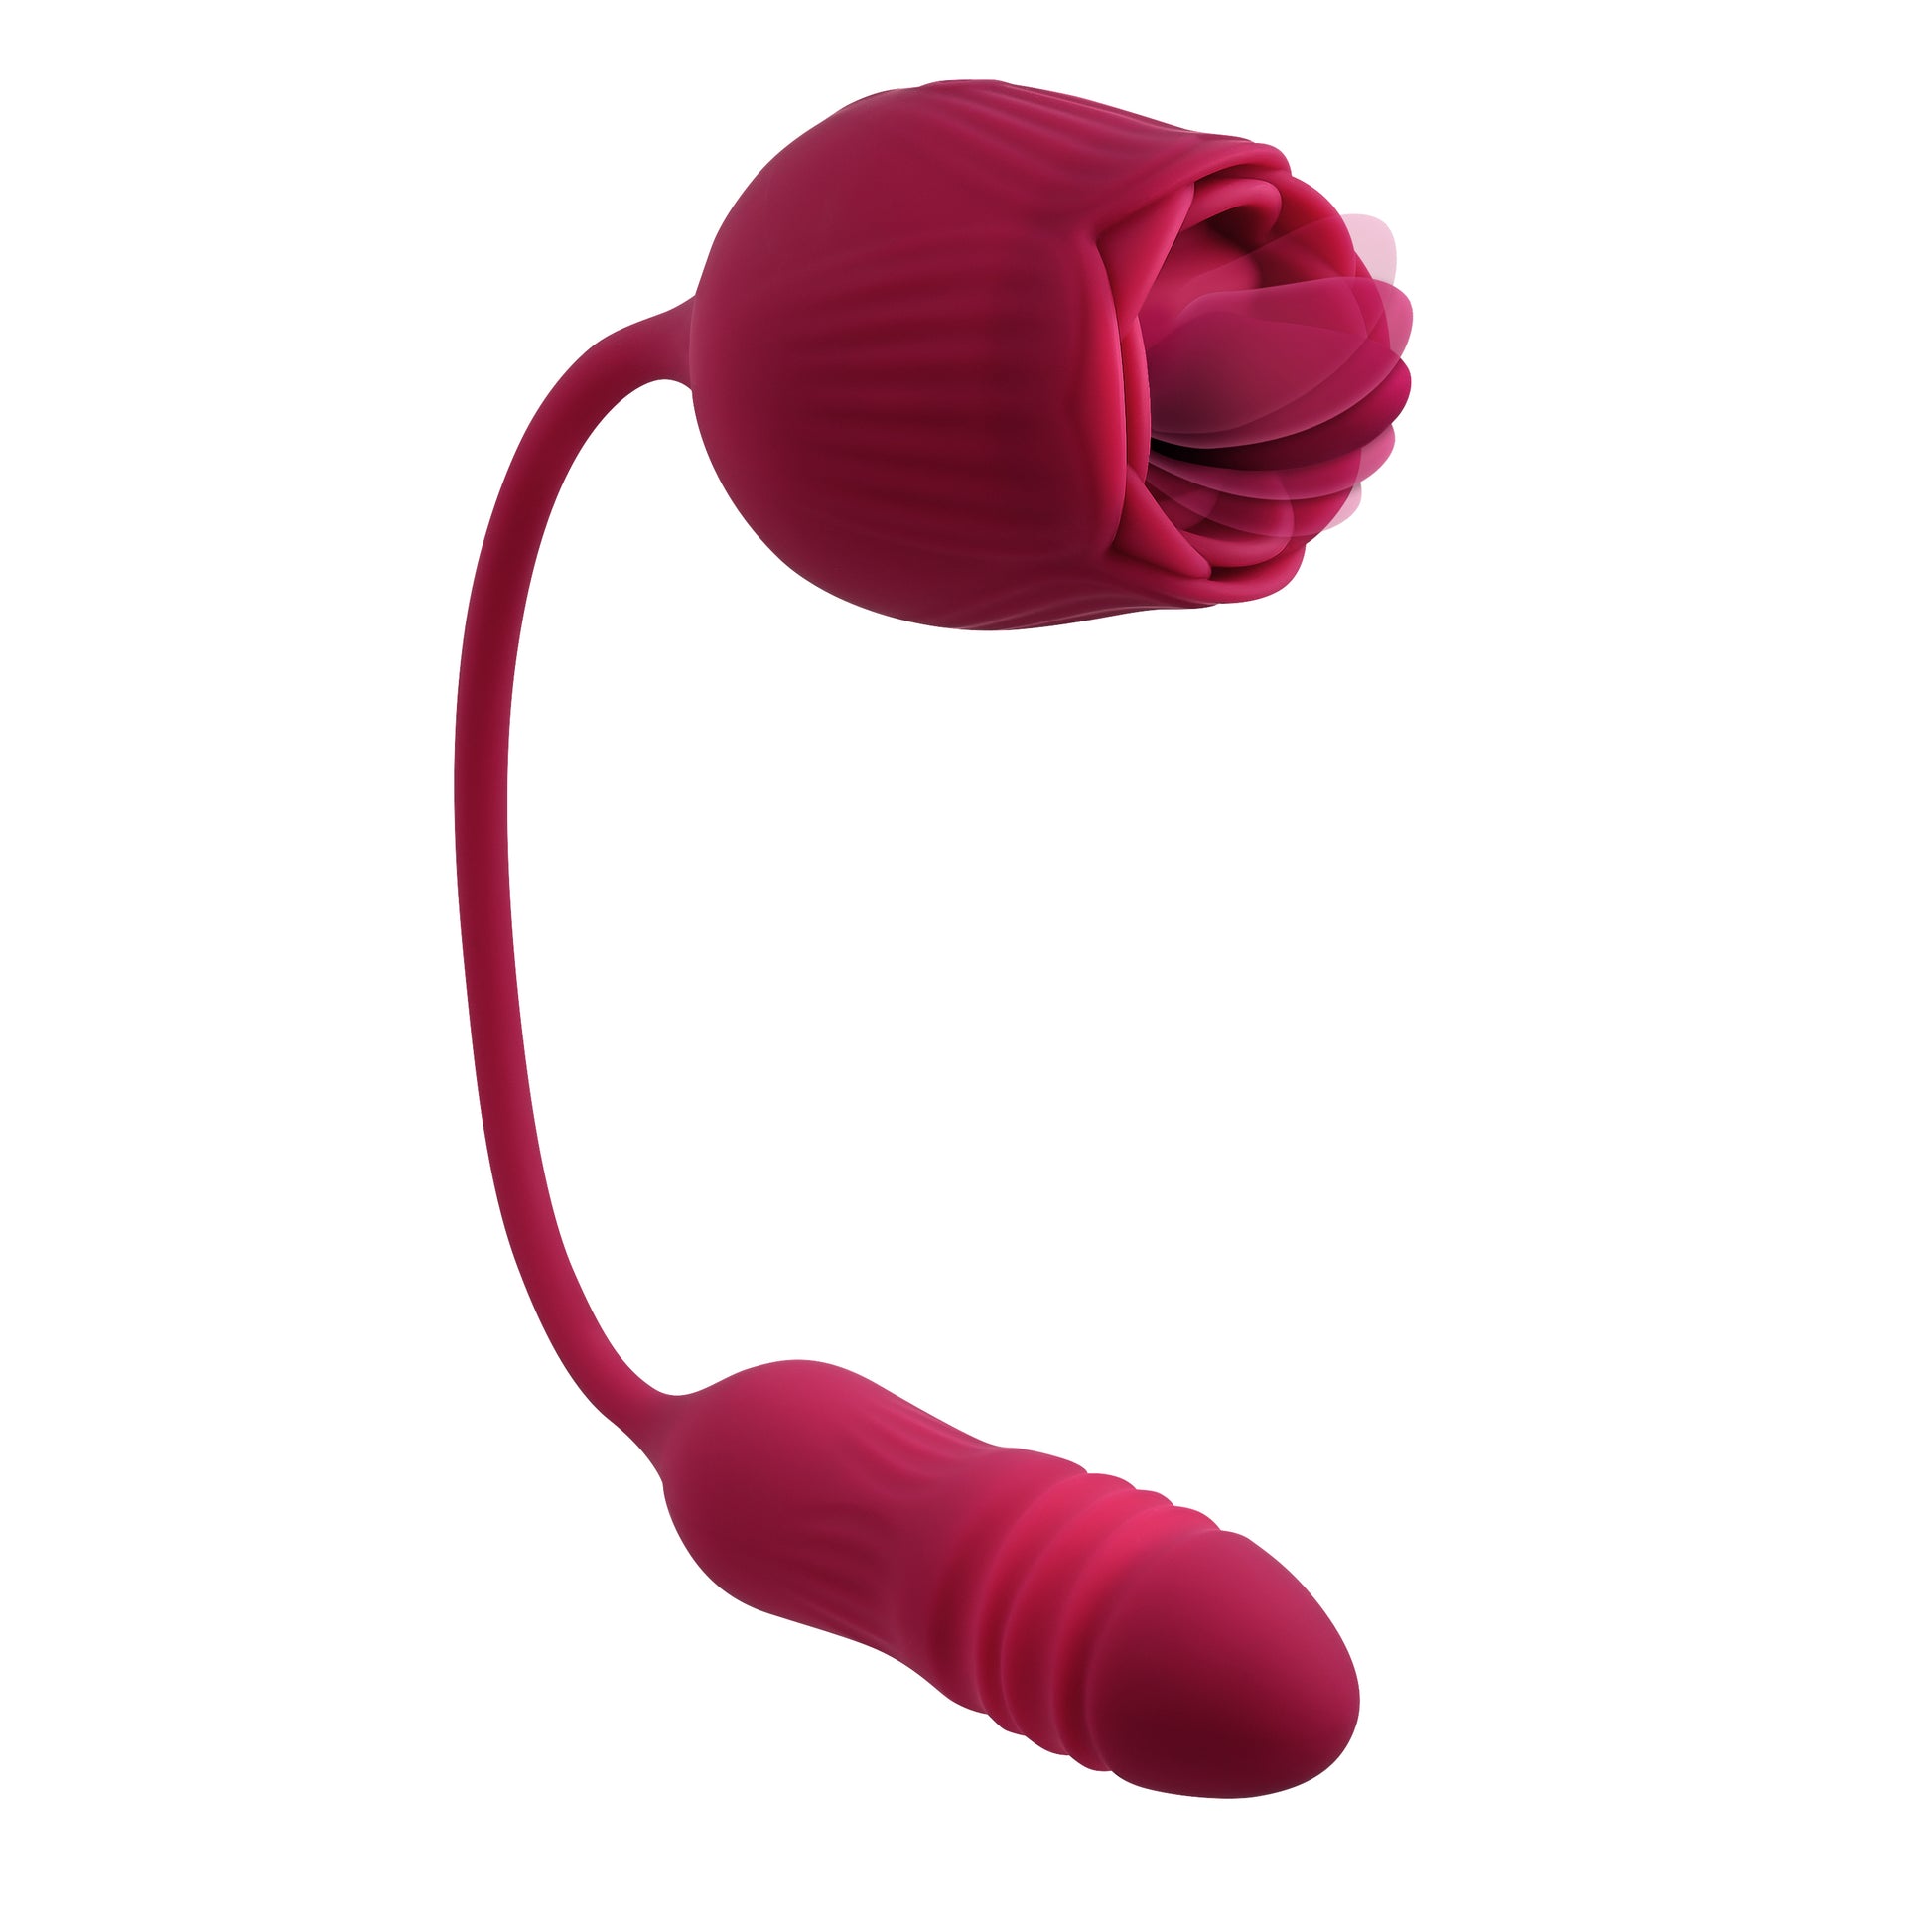 Side view shows the movement of the flicker portion of the Wild Rose Rechargeable Silicone Clitoral Stimulator from Evolved.